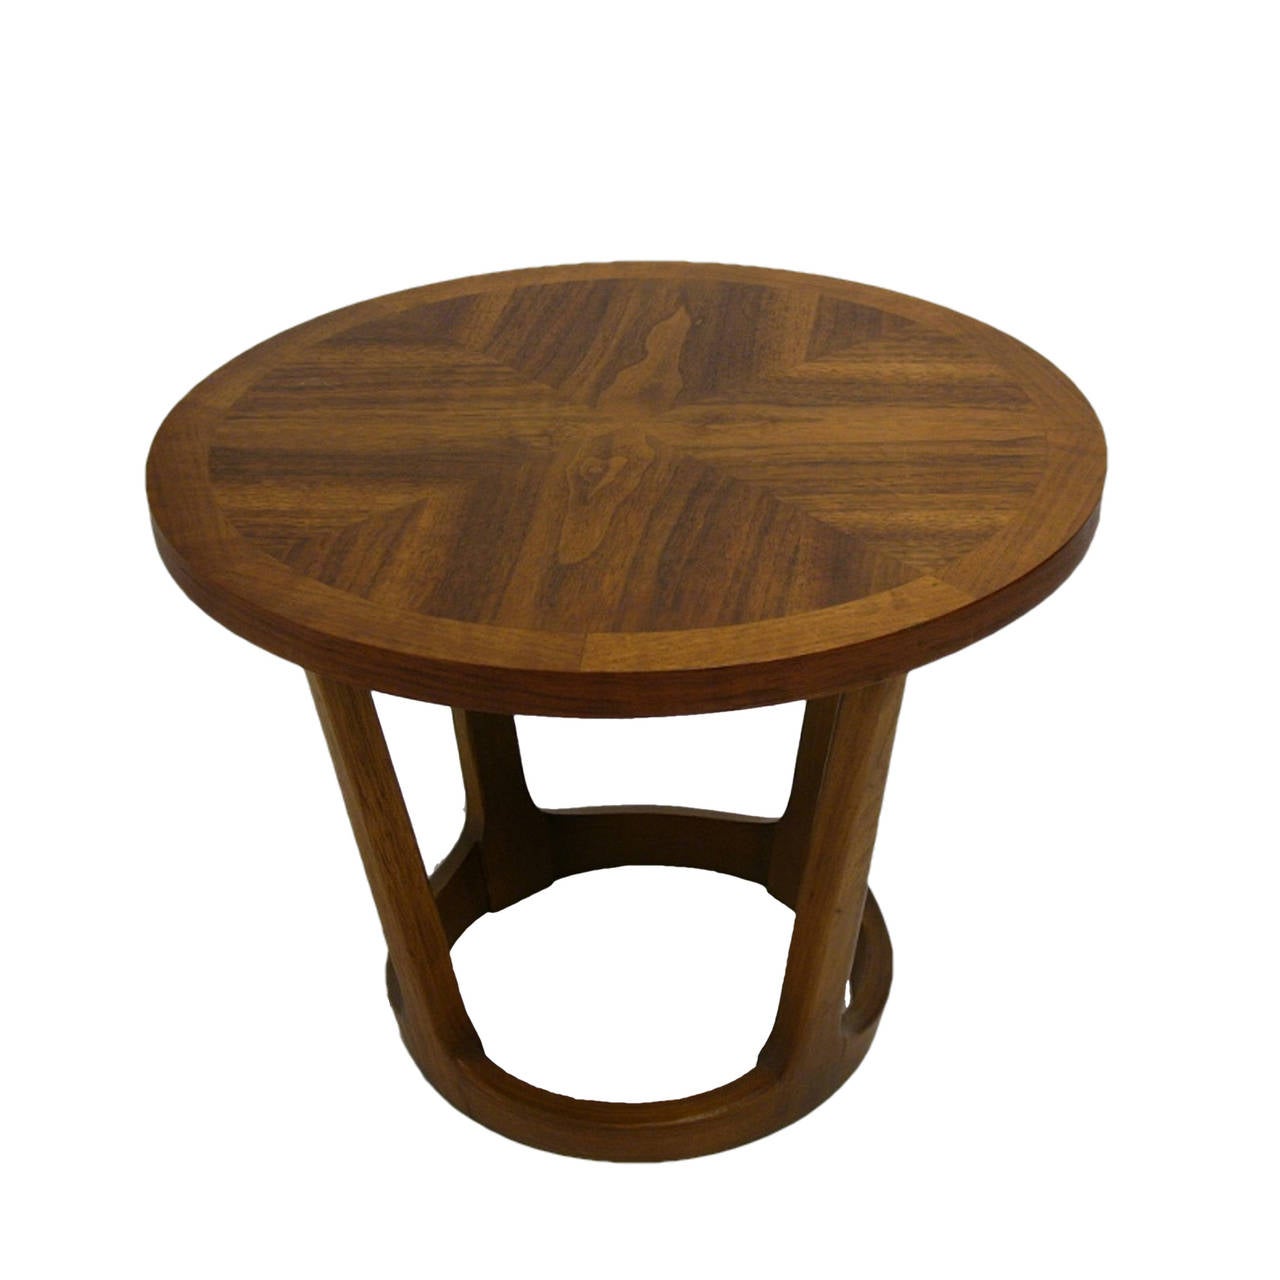 Decorative midcentury modern end table by Lane. beautiful detail on top.